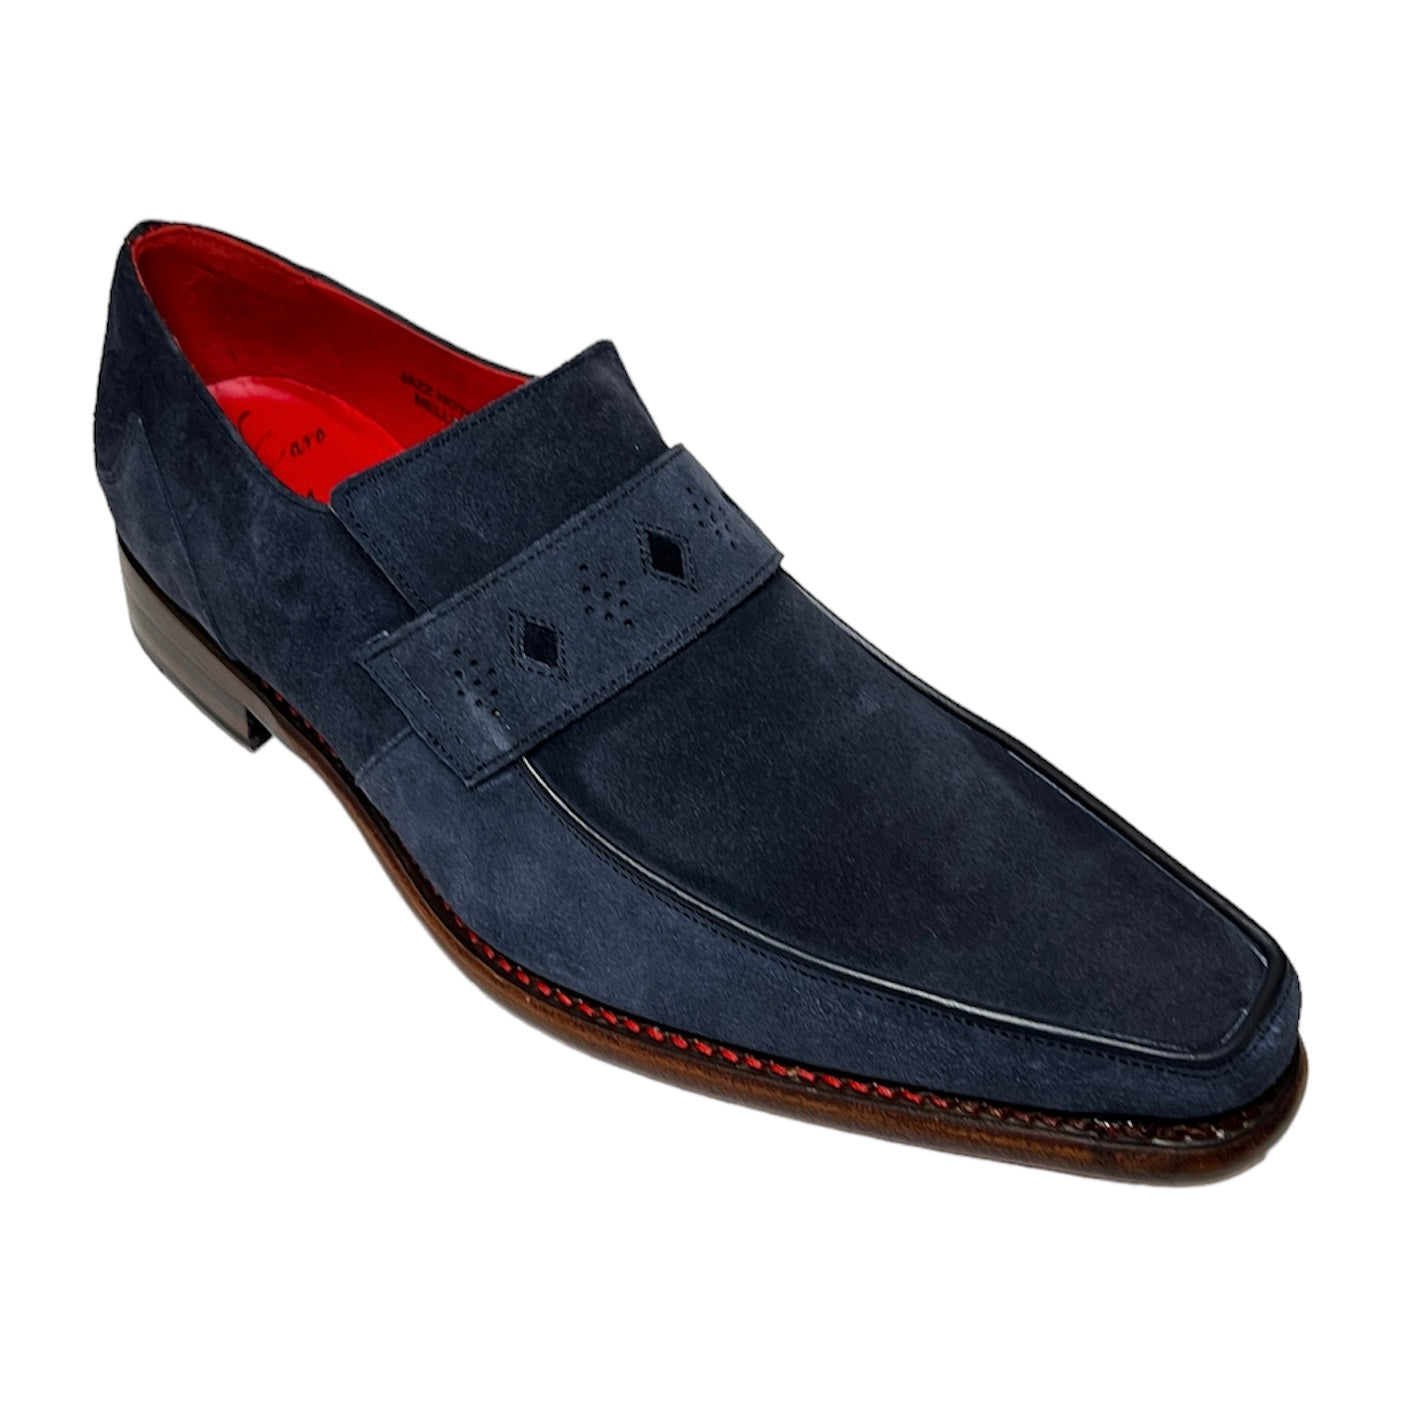 "Jazz Note" Melly Suede Loafer